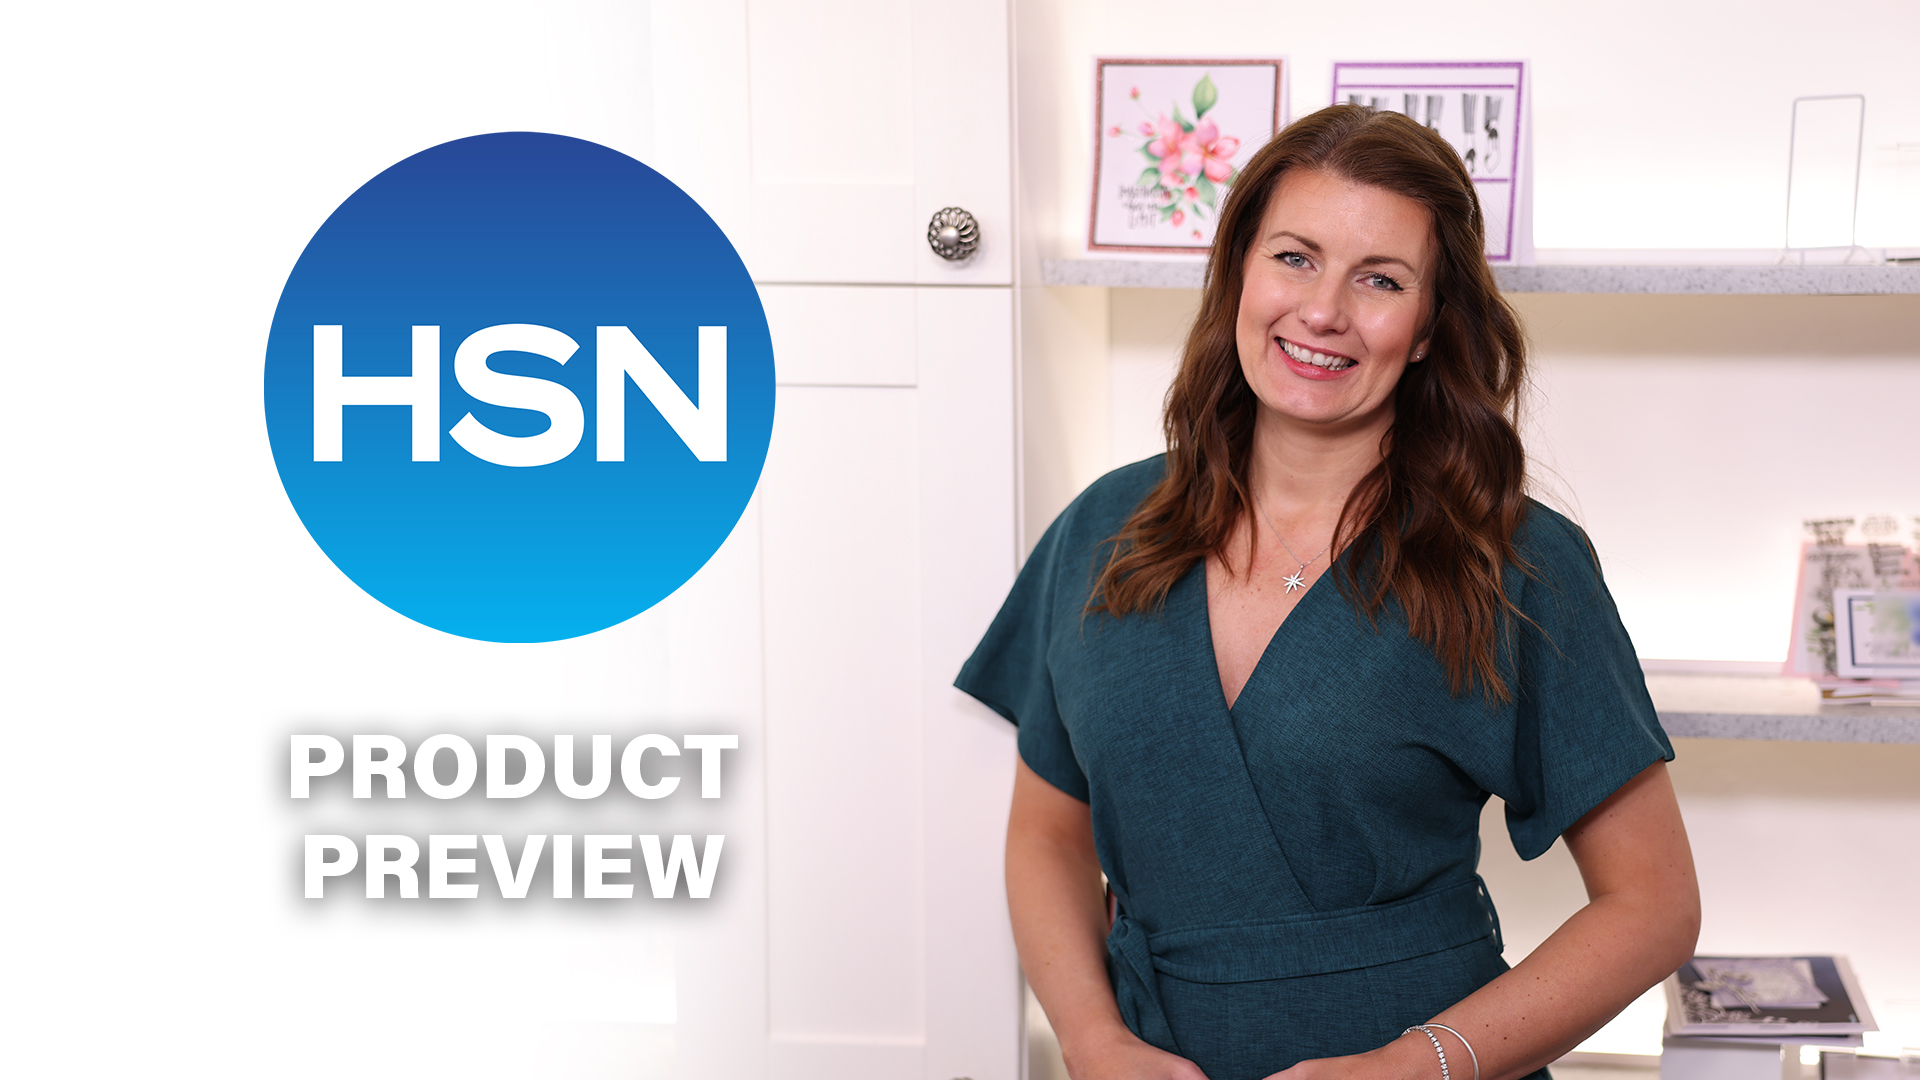 hsn-show-march-28th---join-me-for-my-product-preview-from-my-own-studios-on-wednesday-15th-march-23